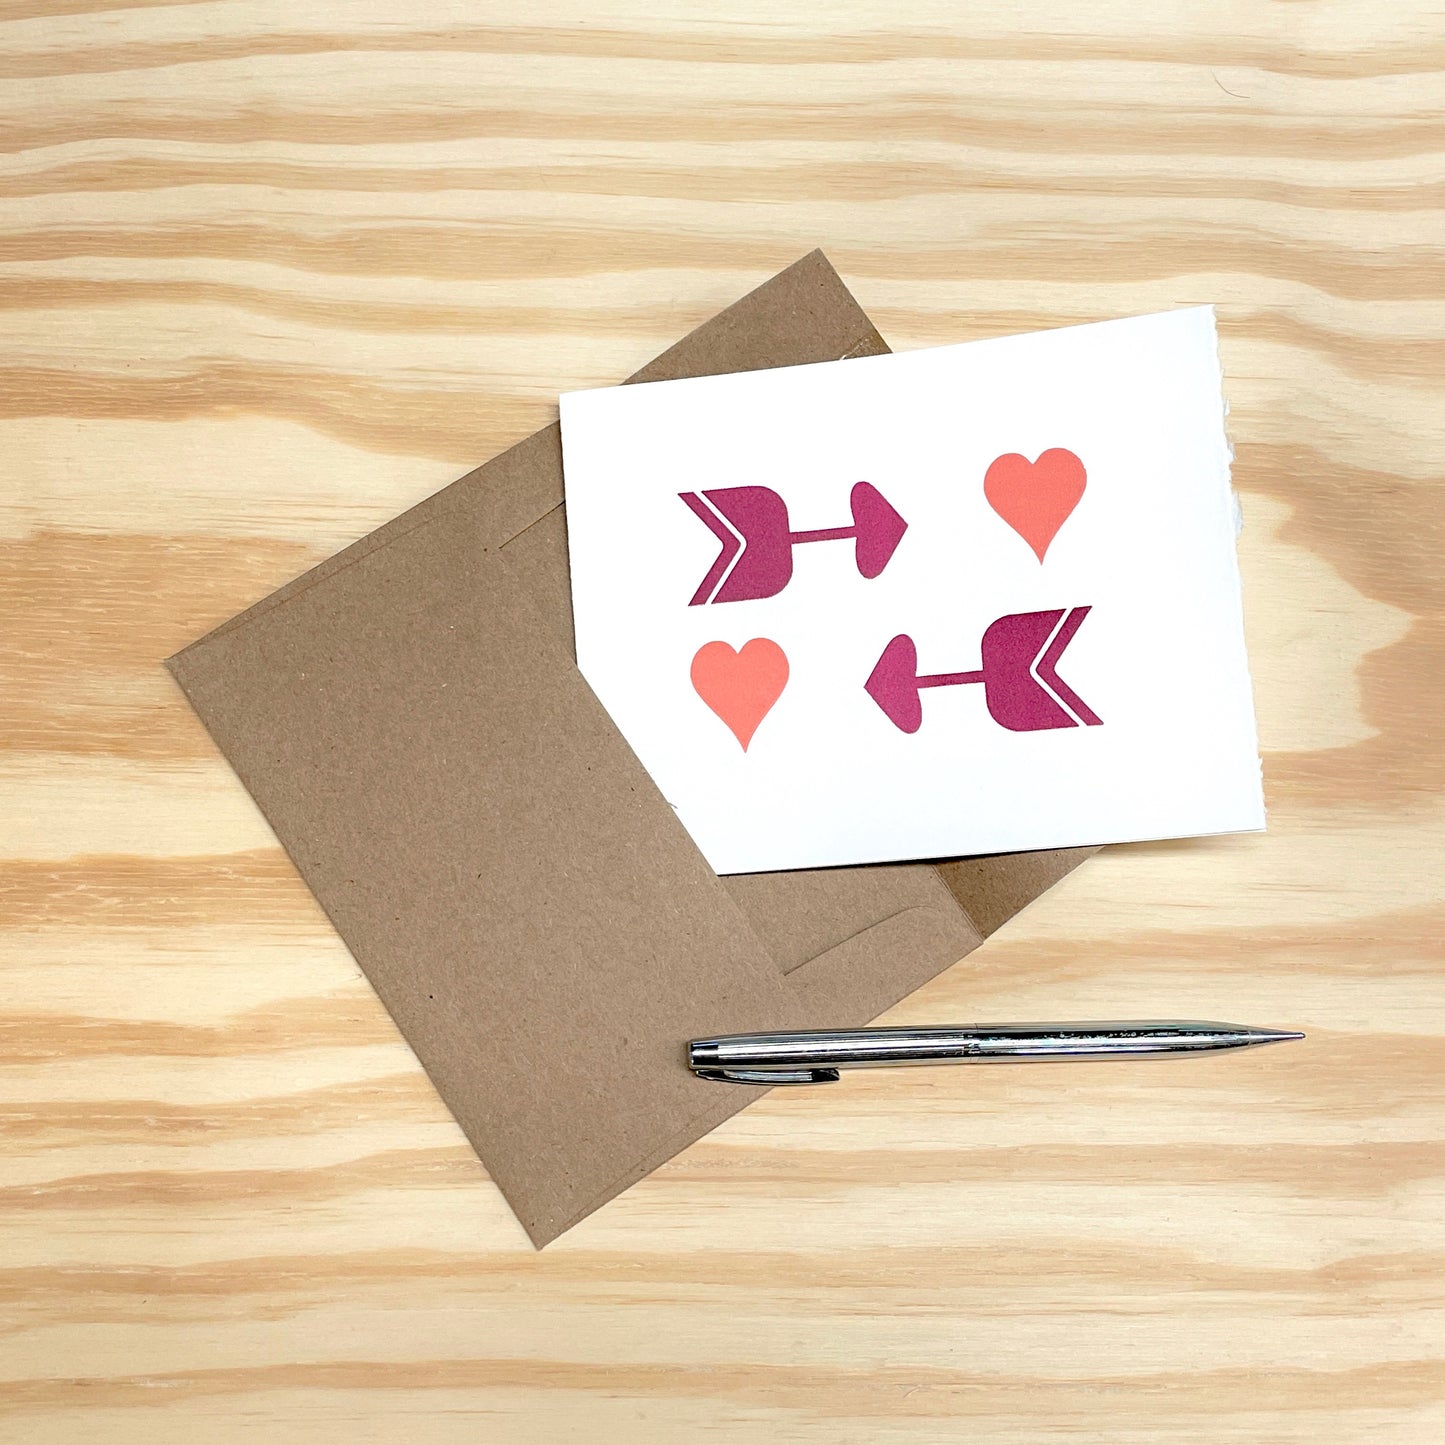 Arrows and Hearts - single card - wood type letterpress printed